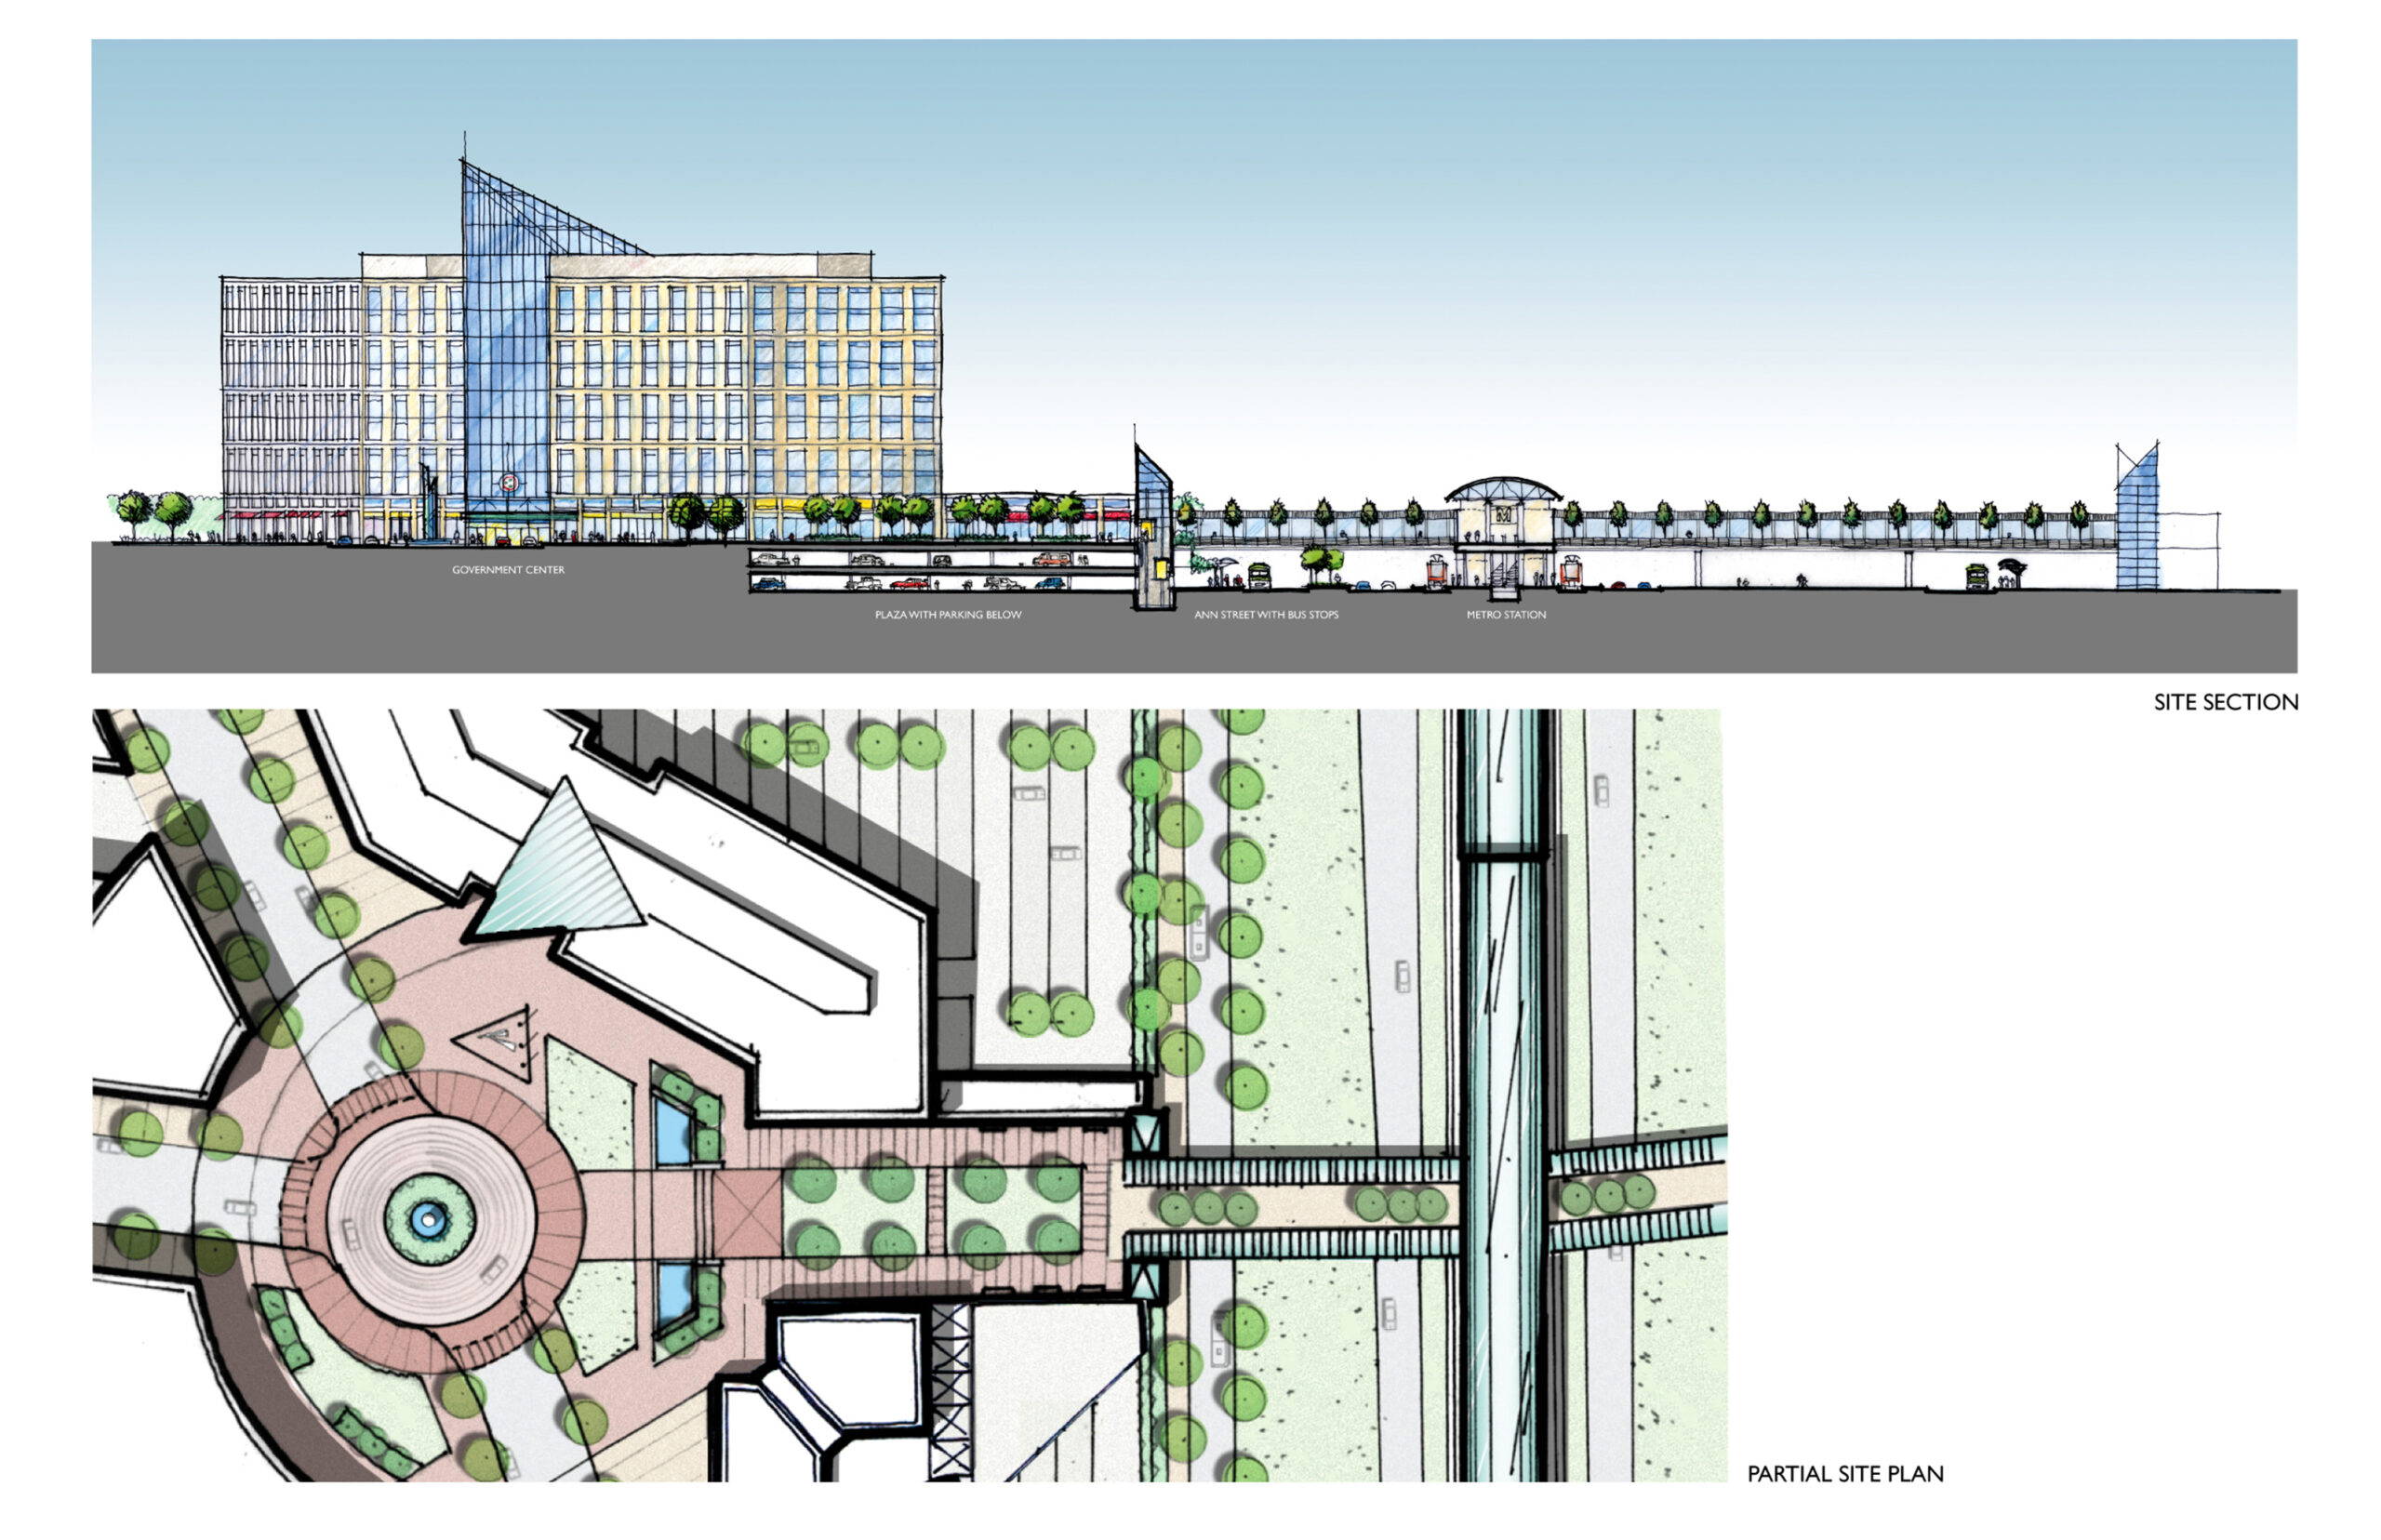 Loudoun County Transit Center - Section and Site Plan